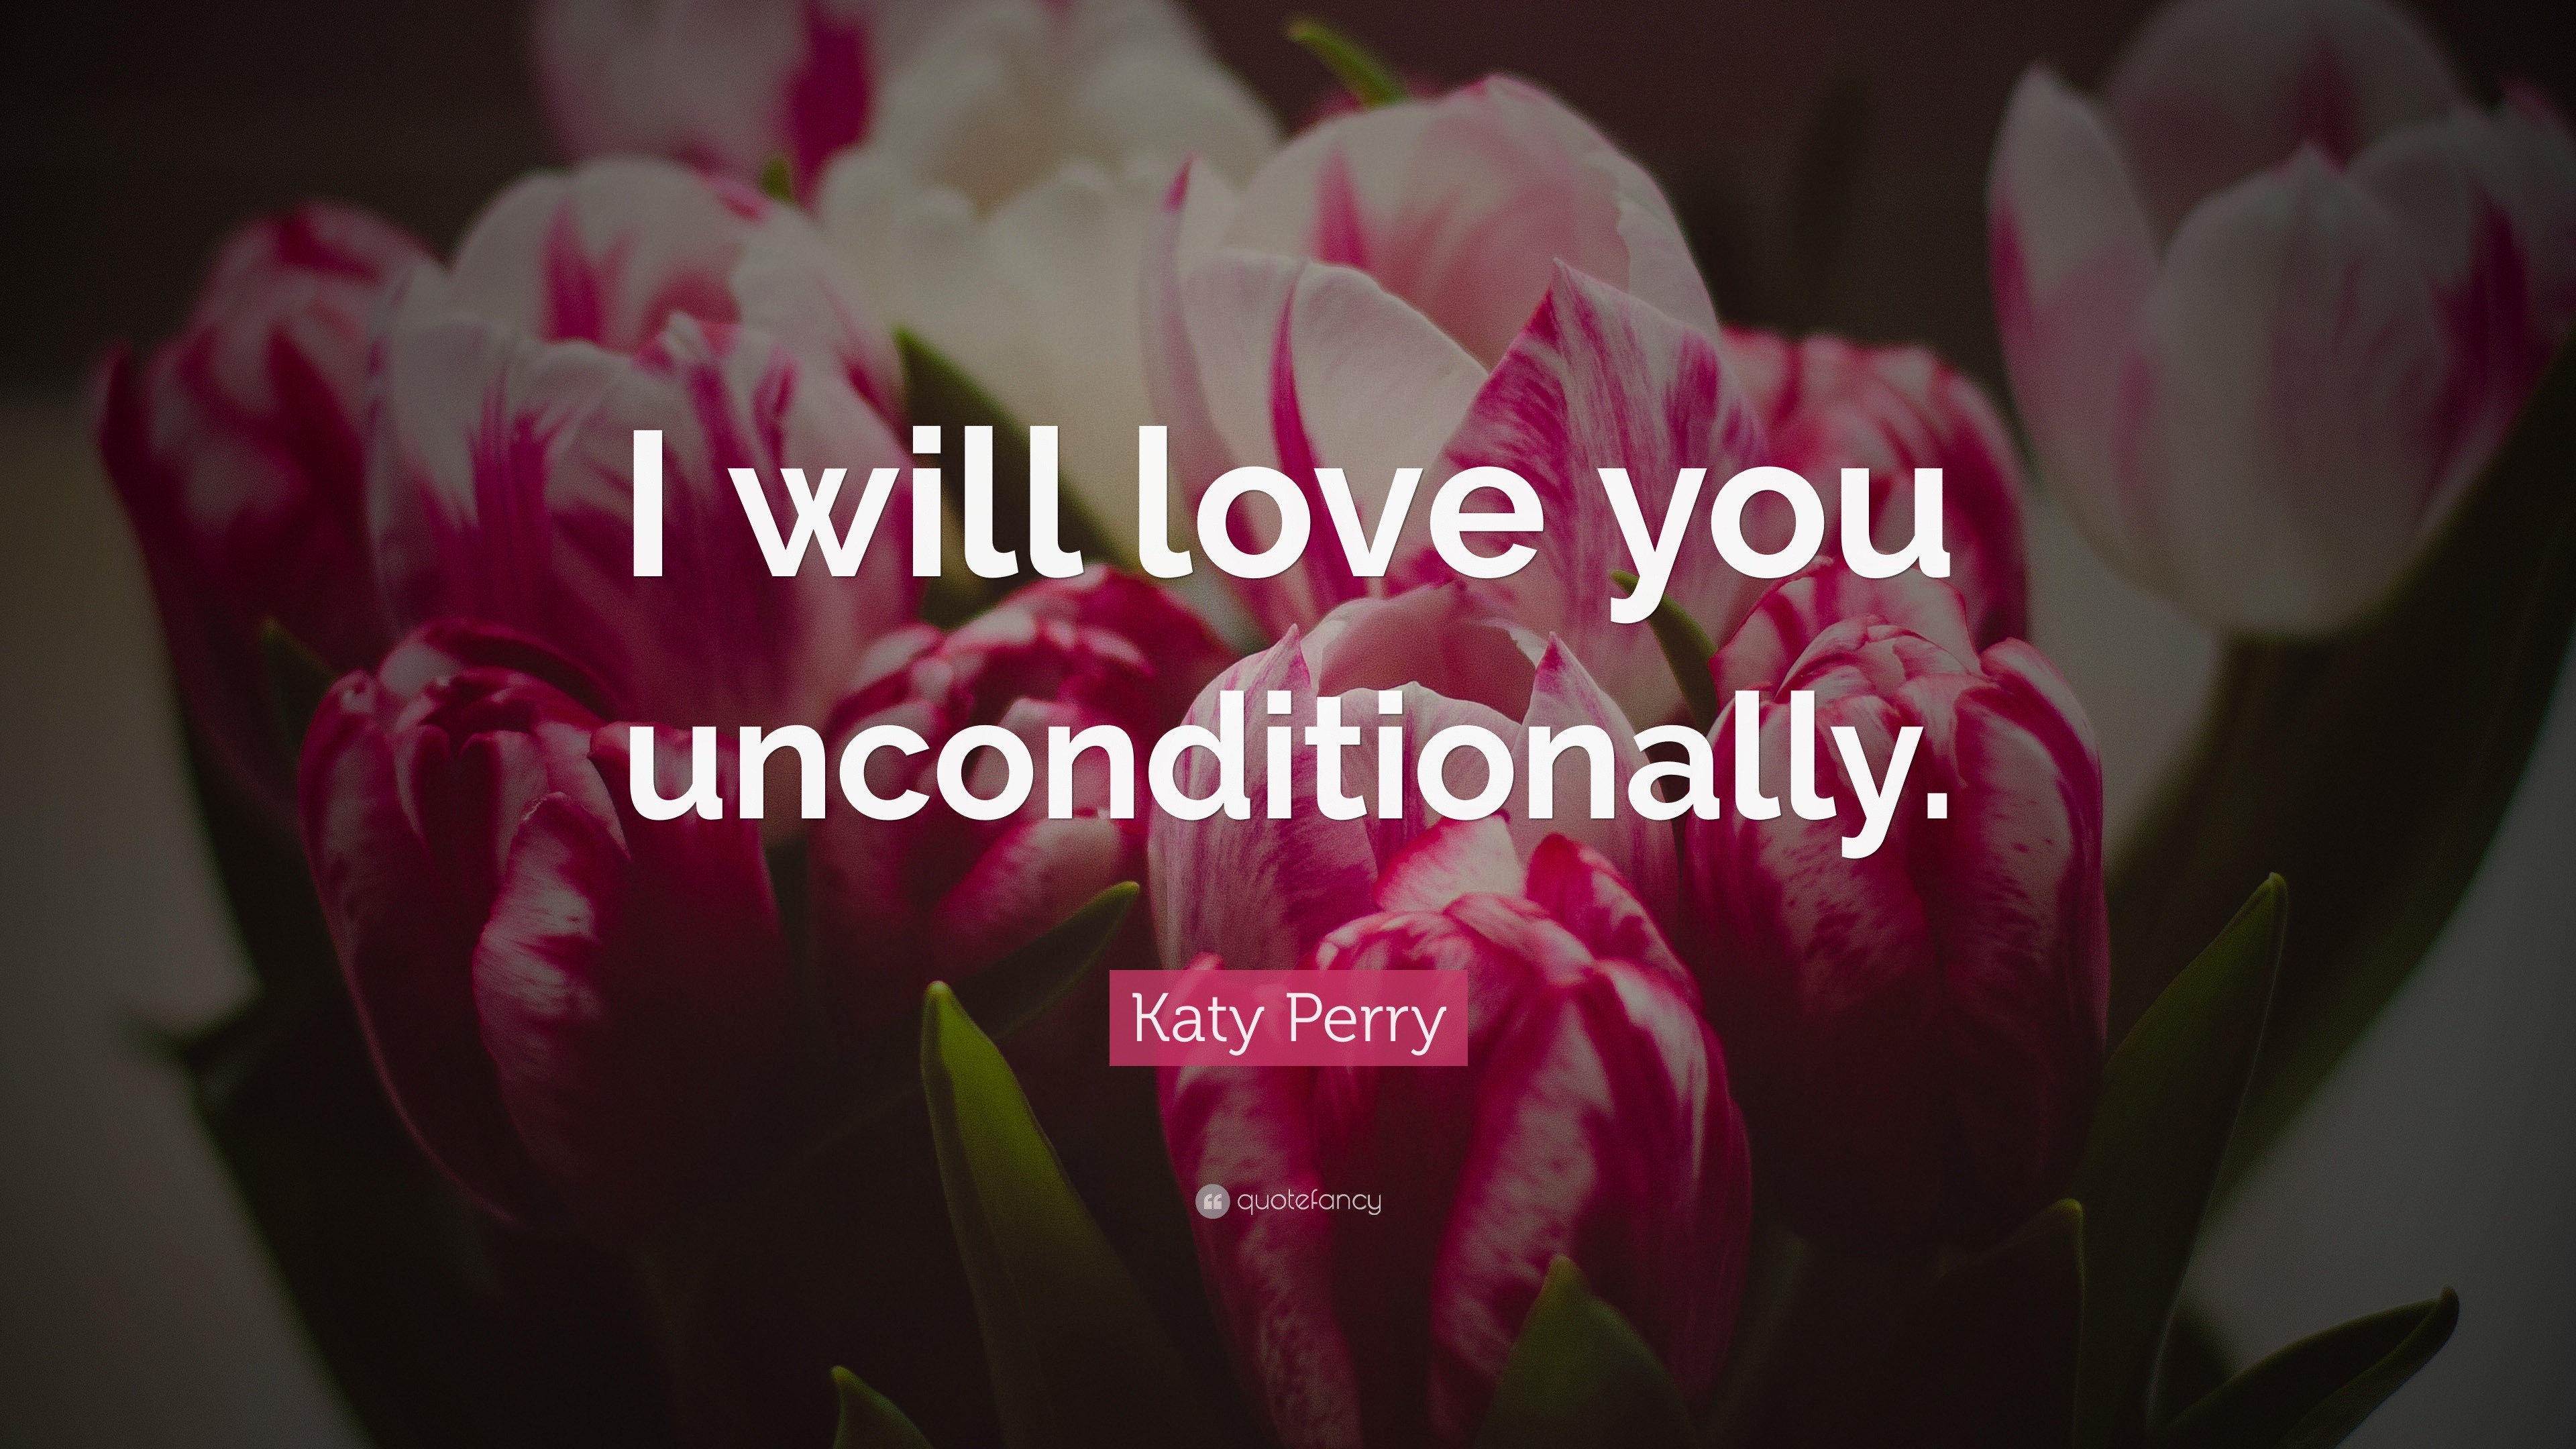 Katy Perry Quote “I will love you unconditionally ”